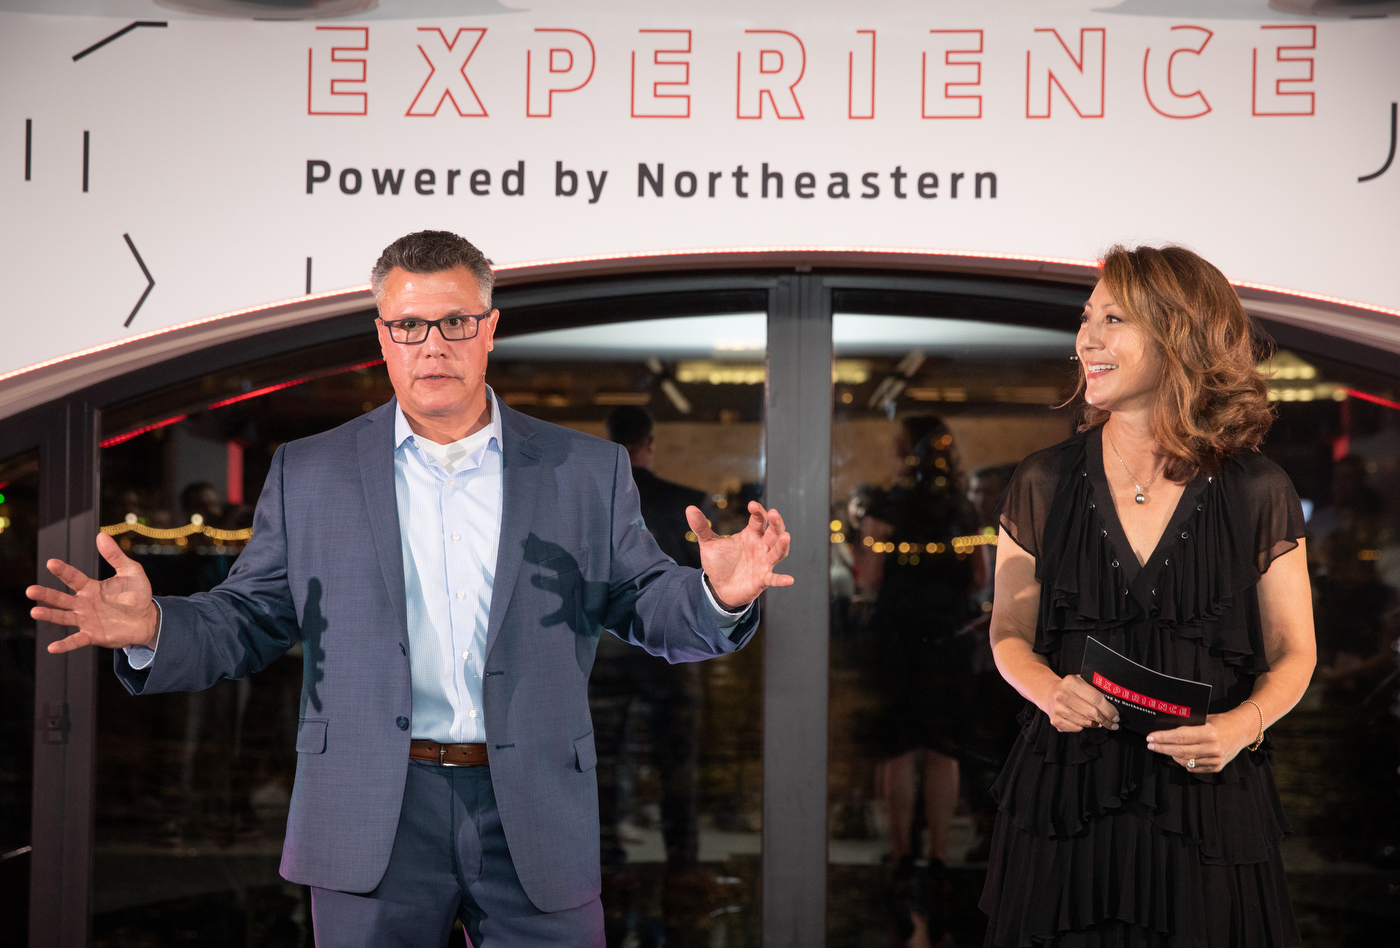 Celebrating Experience Powered by Northeastern